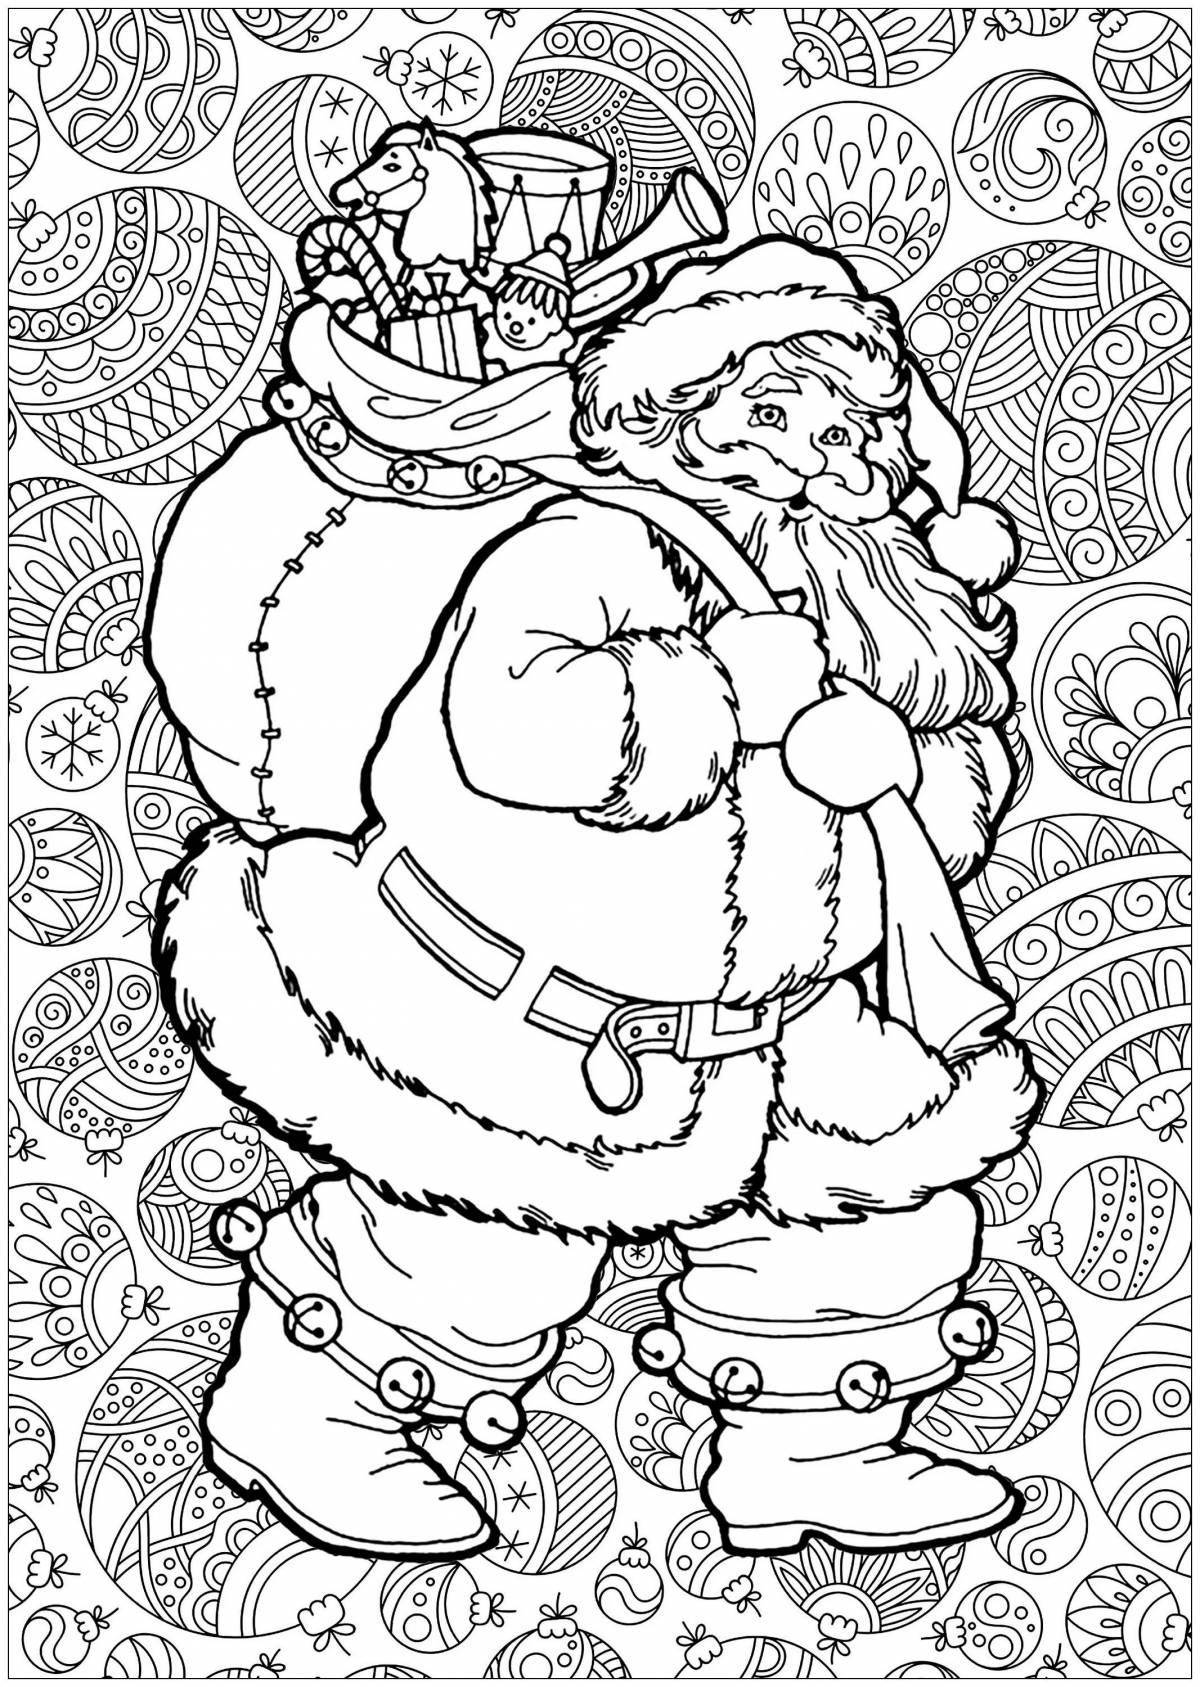 Shiny santa claus coloring book for girls